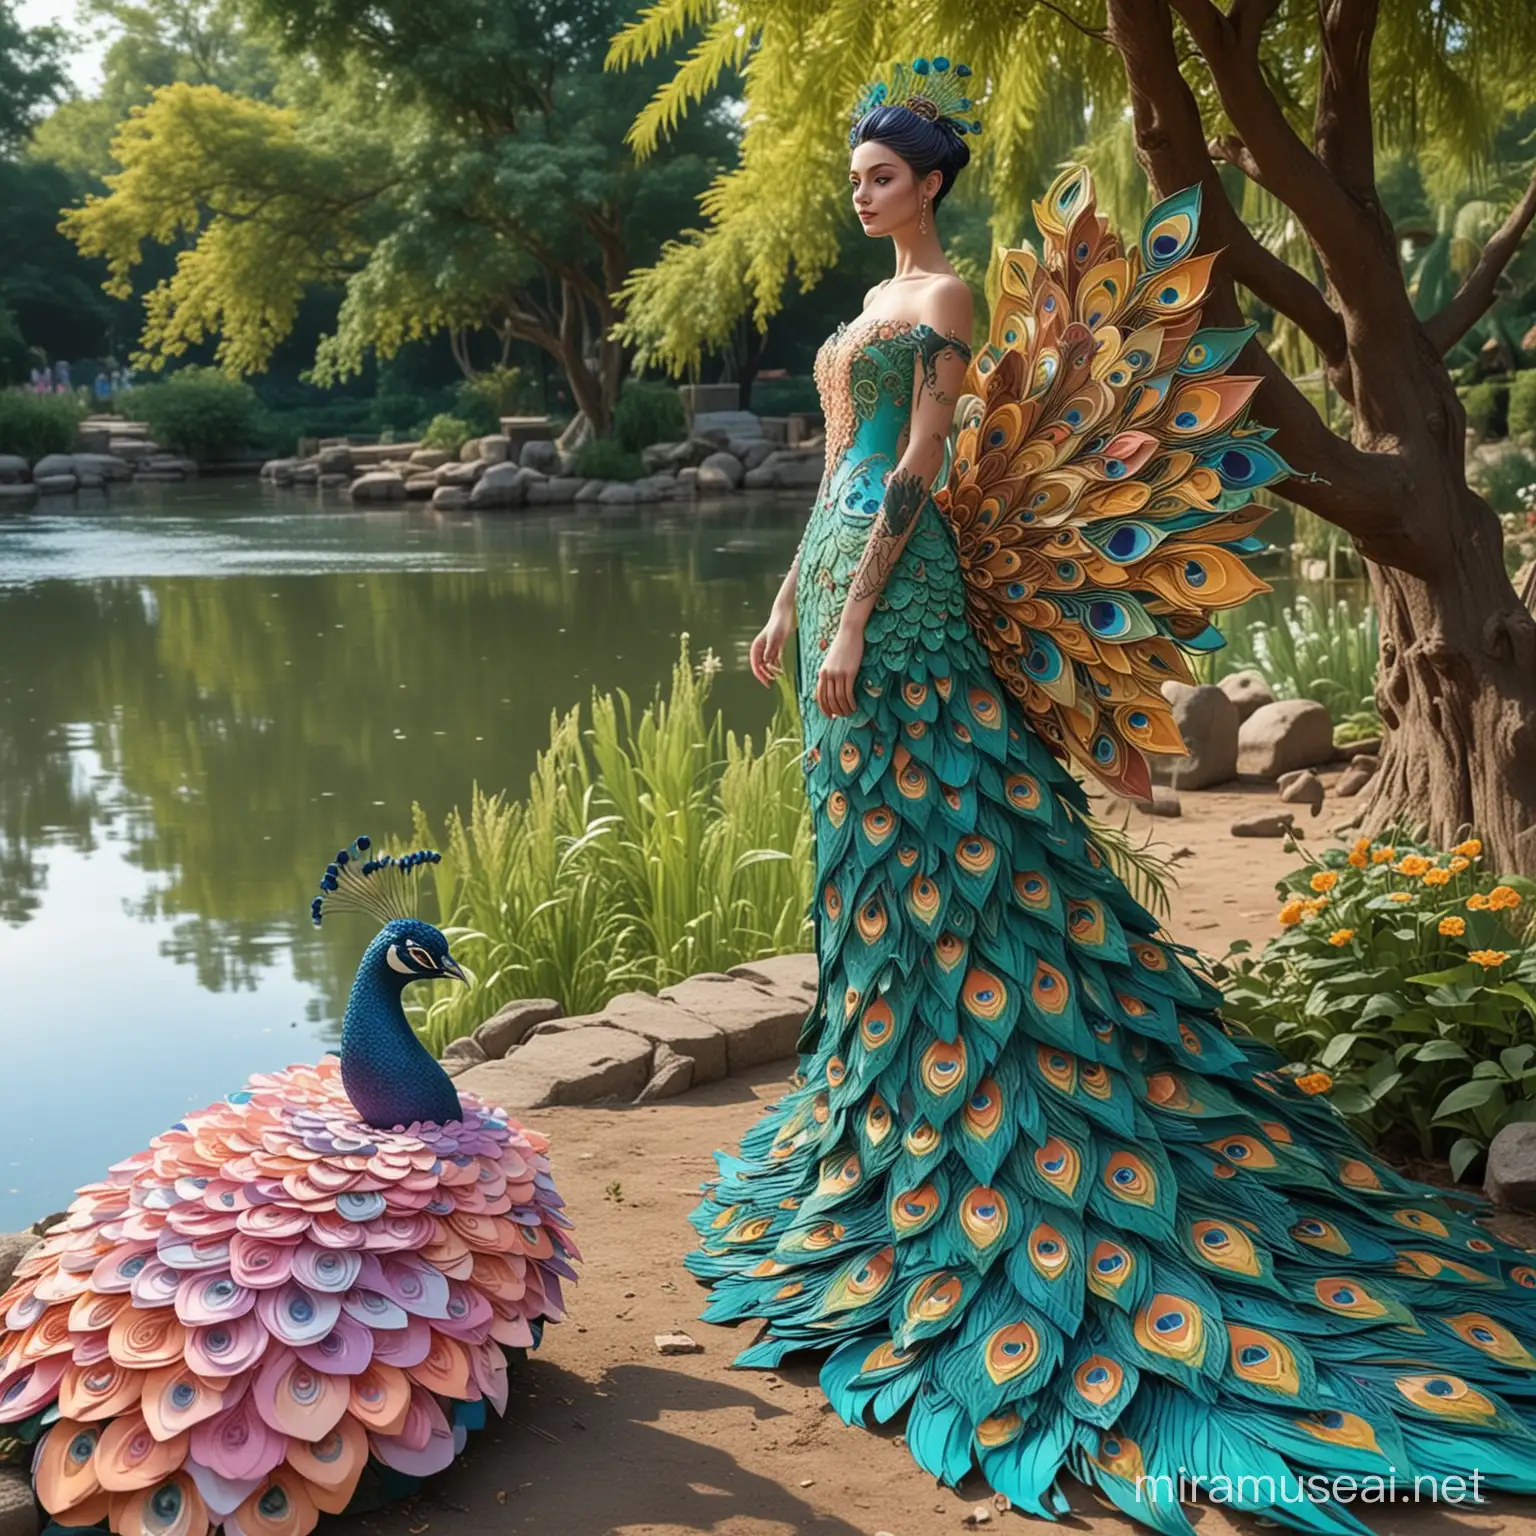 a big realistic beautiful human peacock is made up of paper, paper shape and colors on the mermaid face standing near a lush river which should look like wonderland, tables made-up of pure chocolate, macaroni as trees which are pastel color, humans are in realistic modern gowns. town should look realistic and high detailed paper place